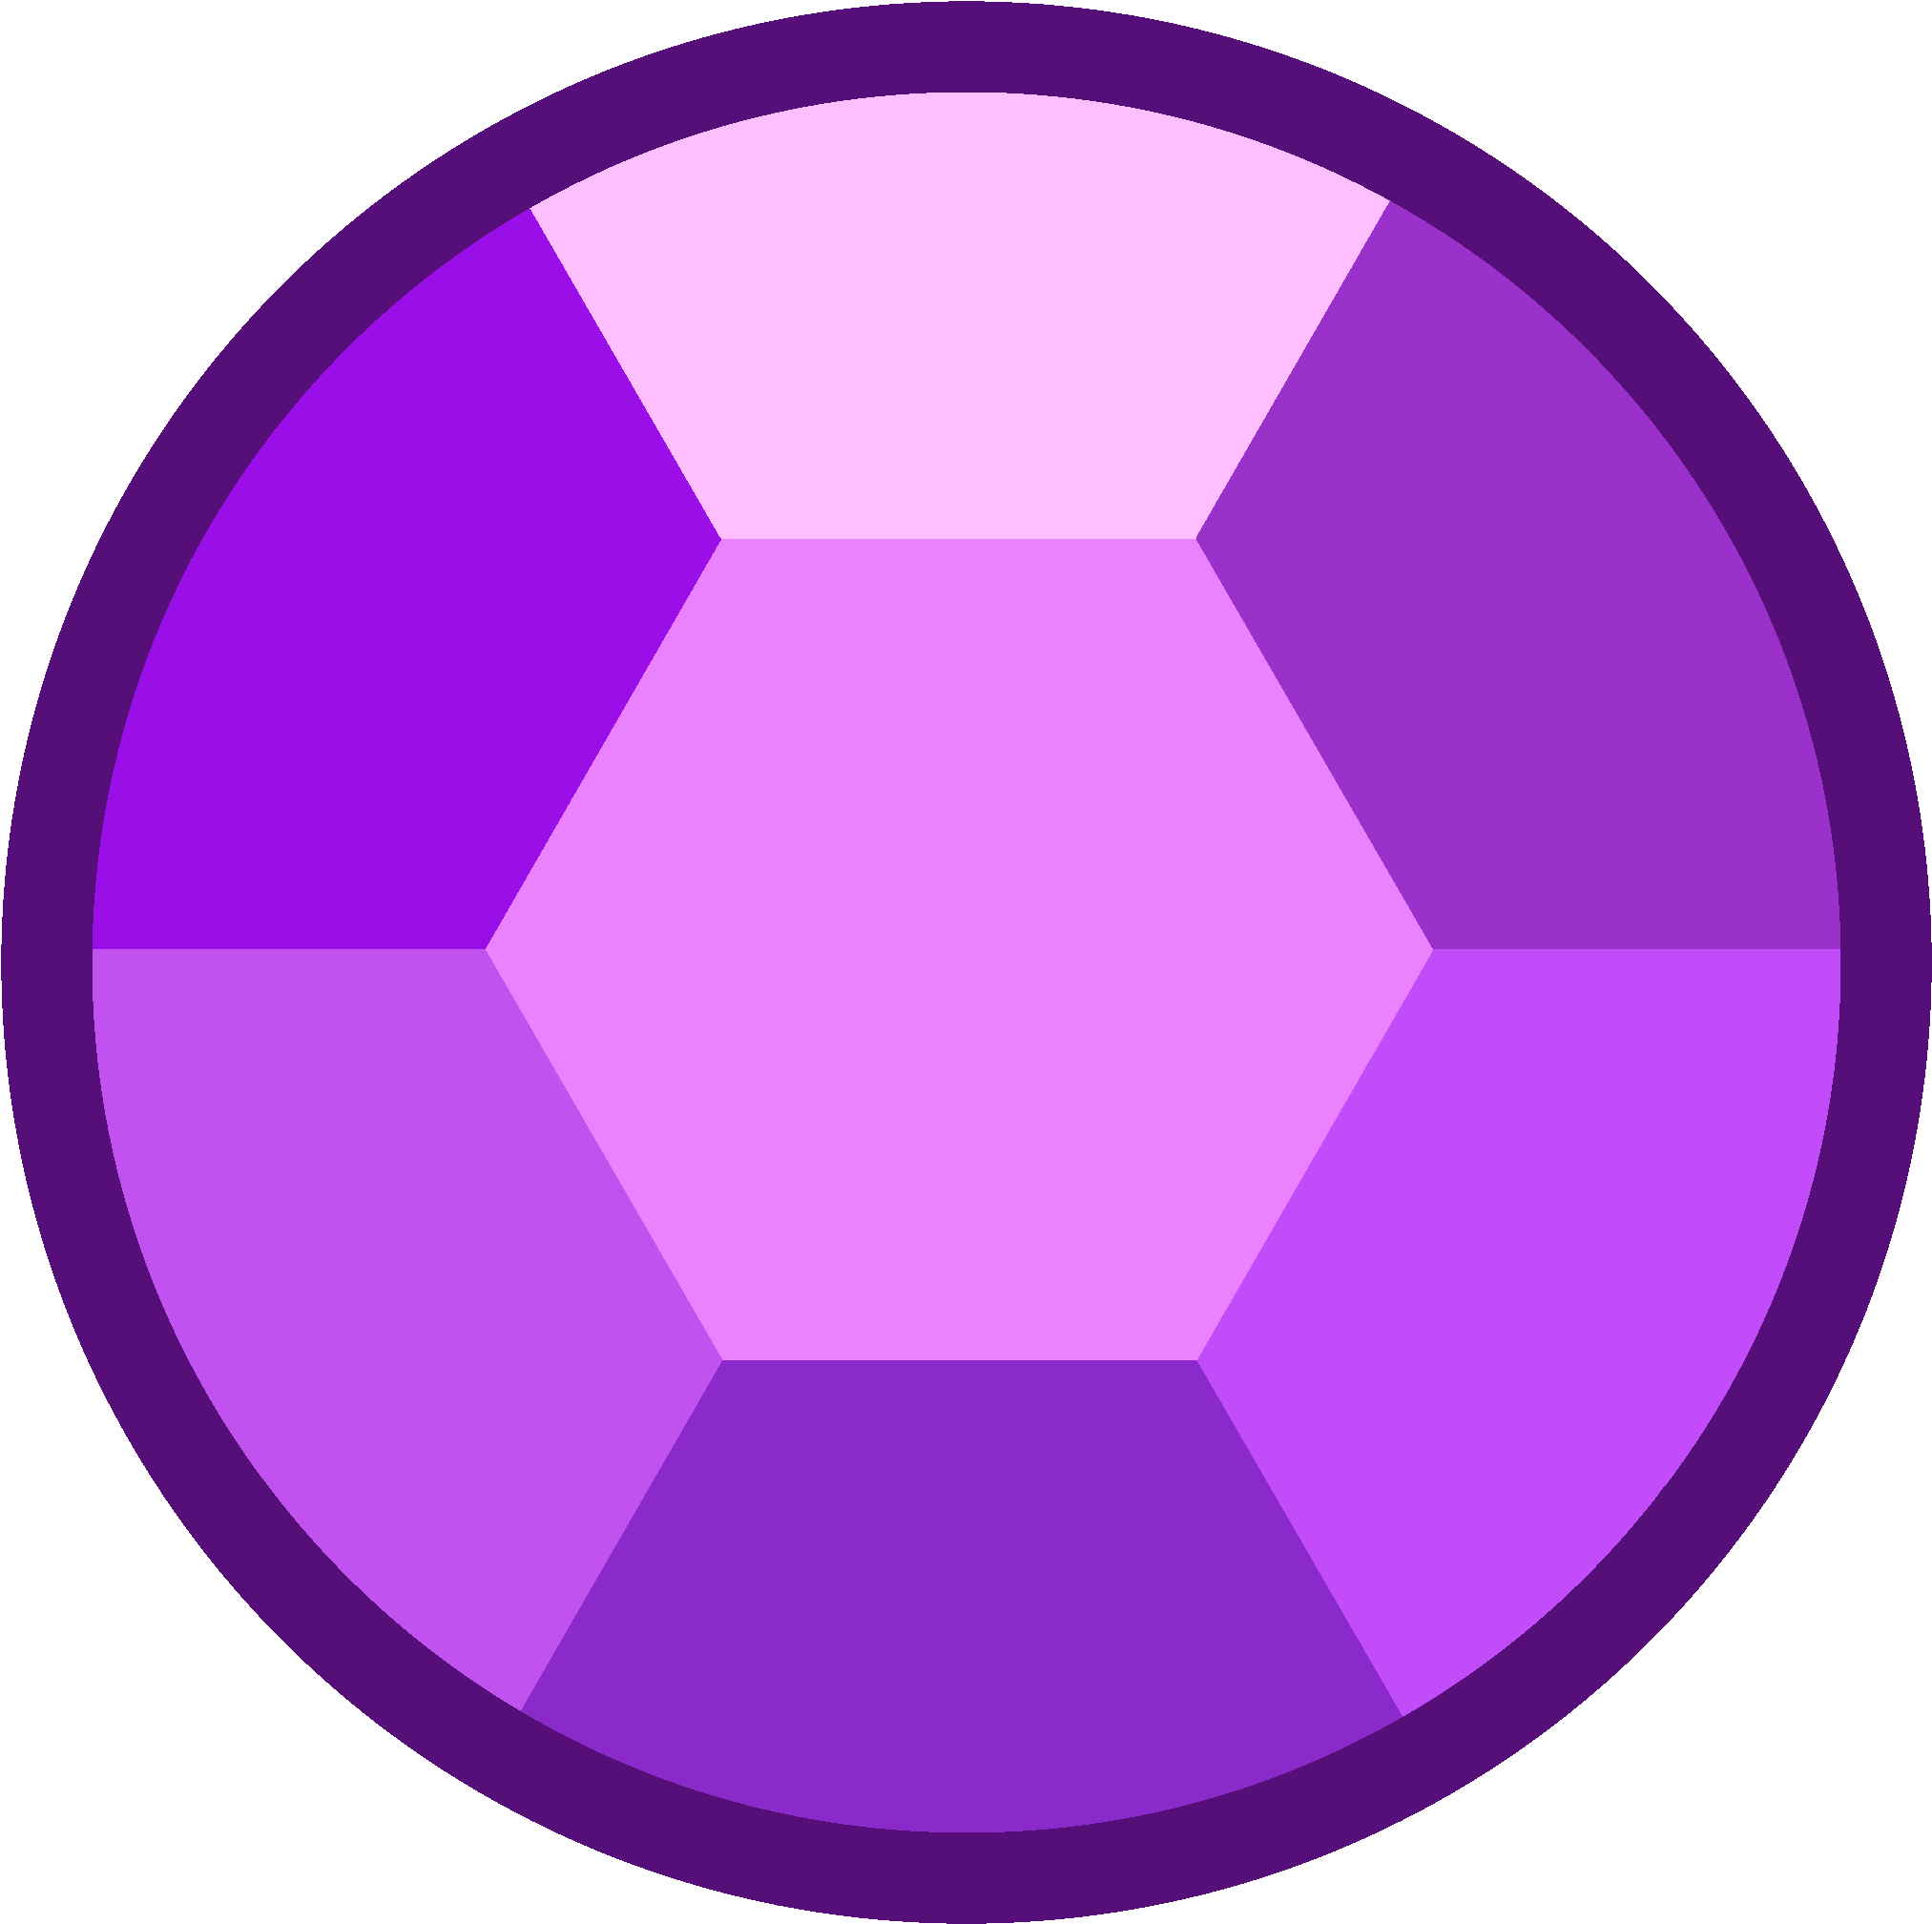 A Purple And White Gem